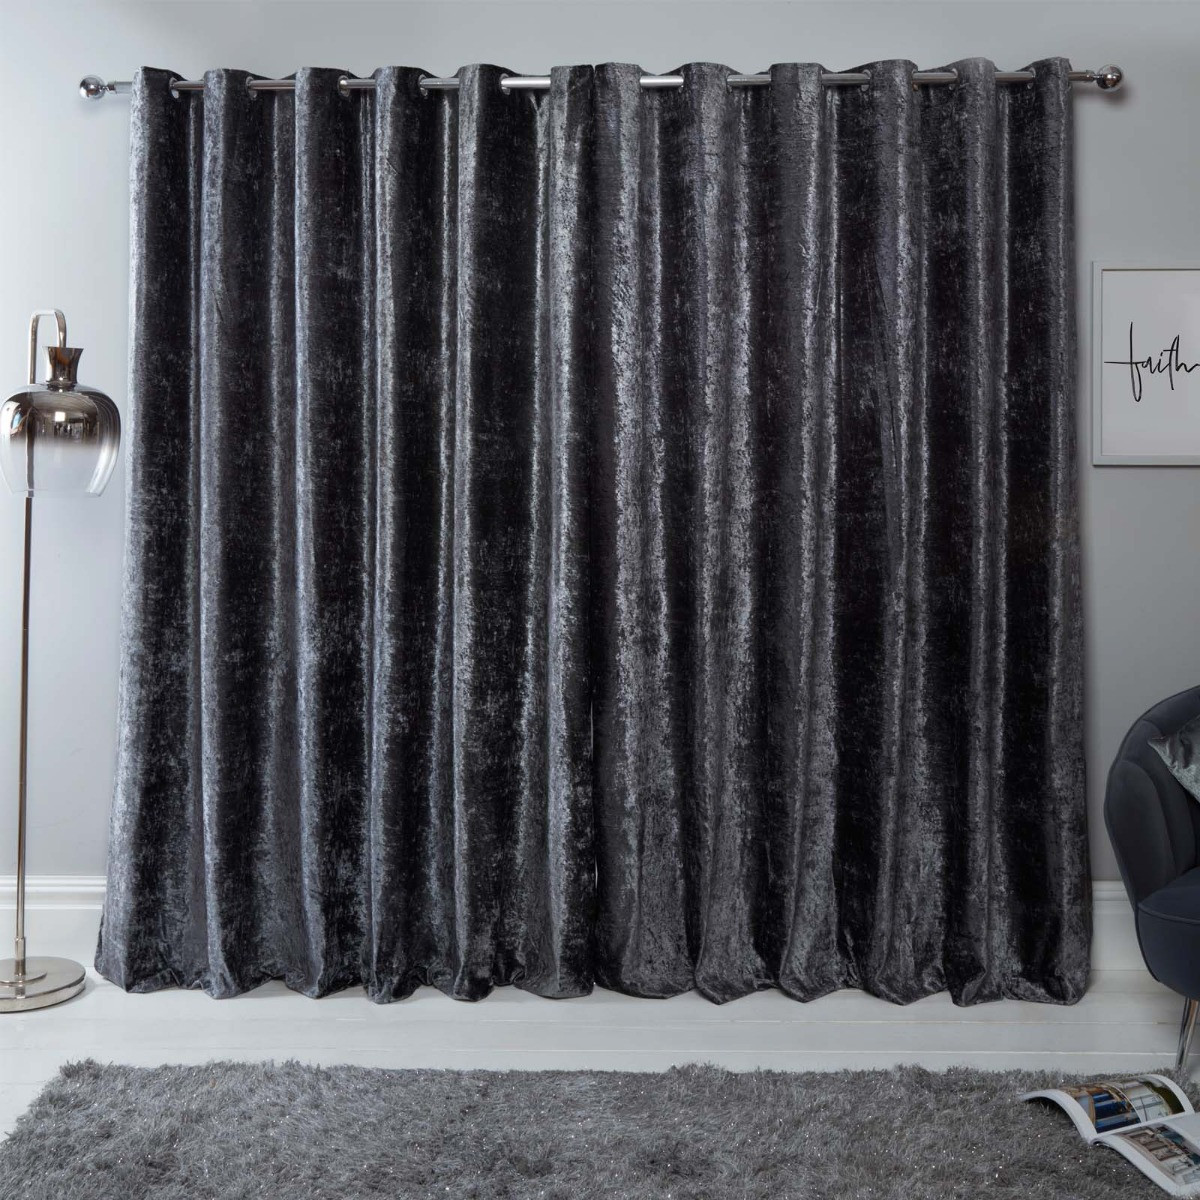 Sienna Home Crushed Velvet Eyelet Curtains - Charcoal Grey 90" x 90">